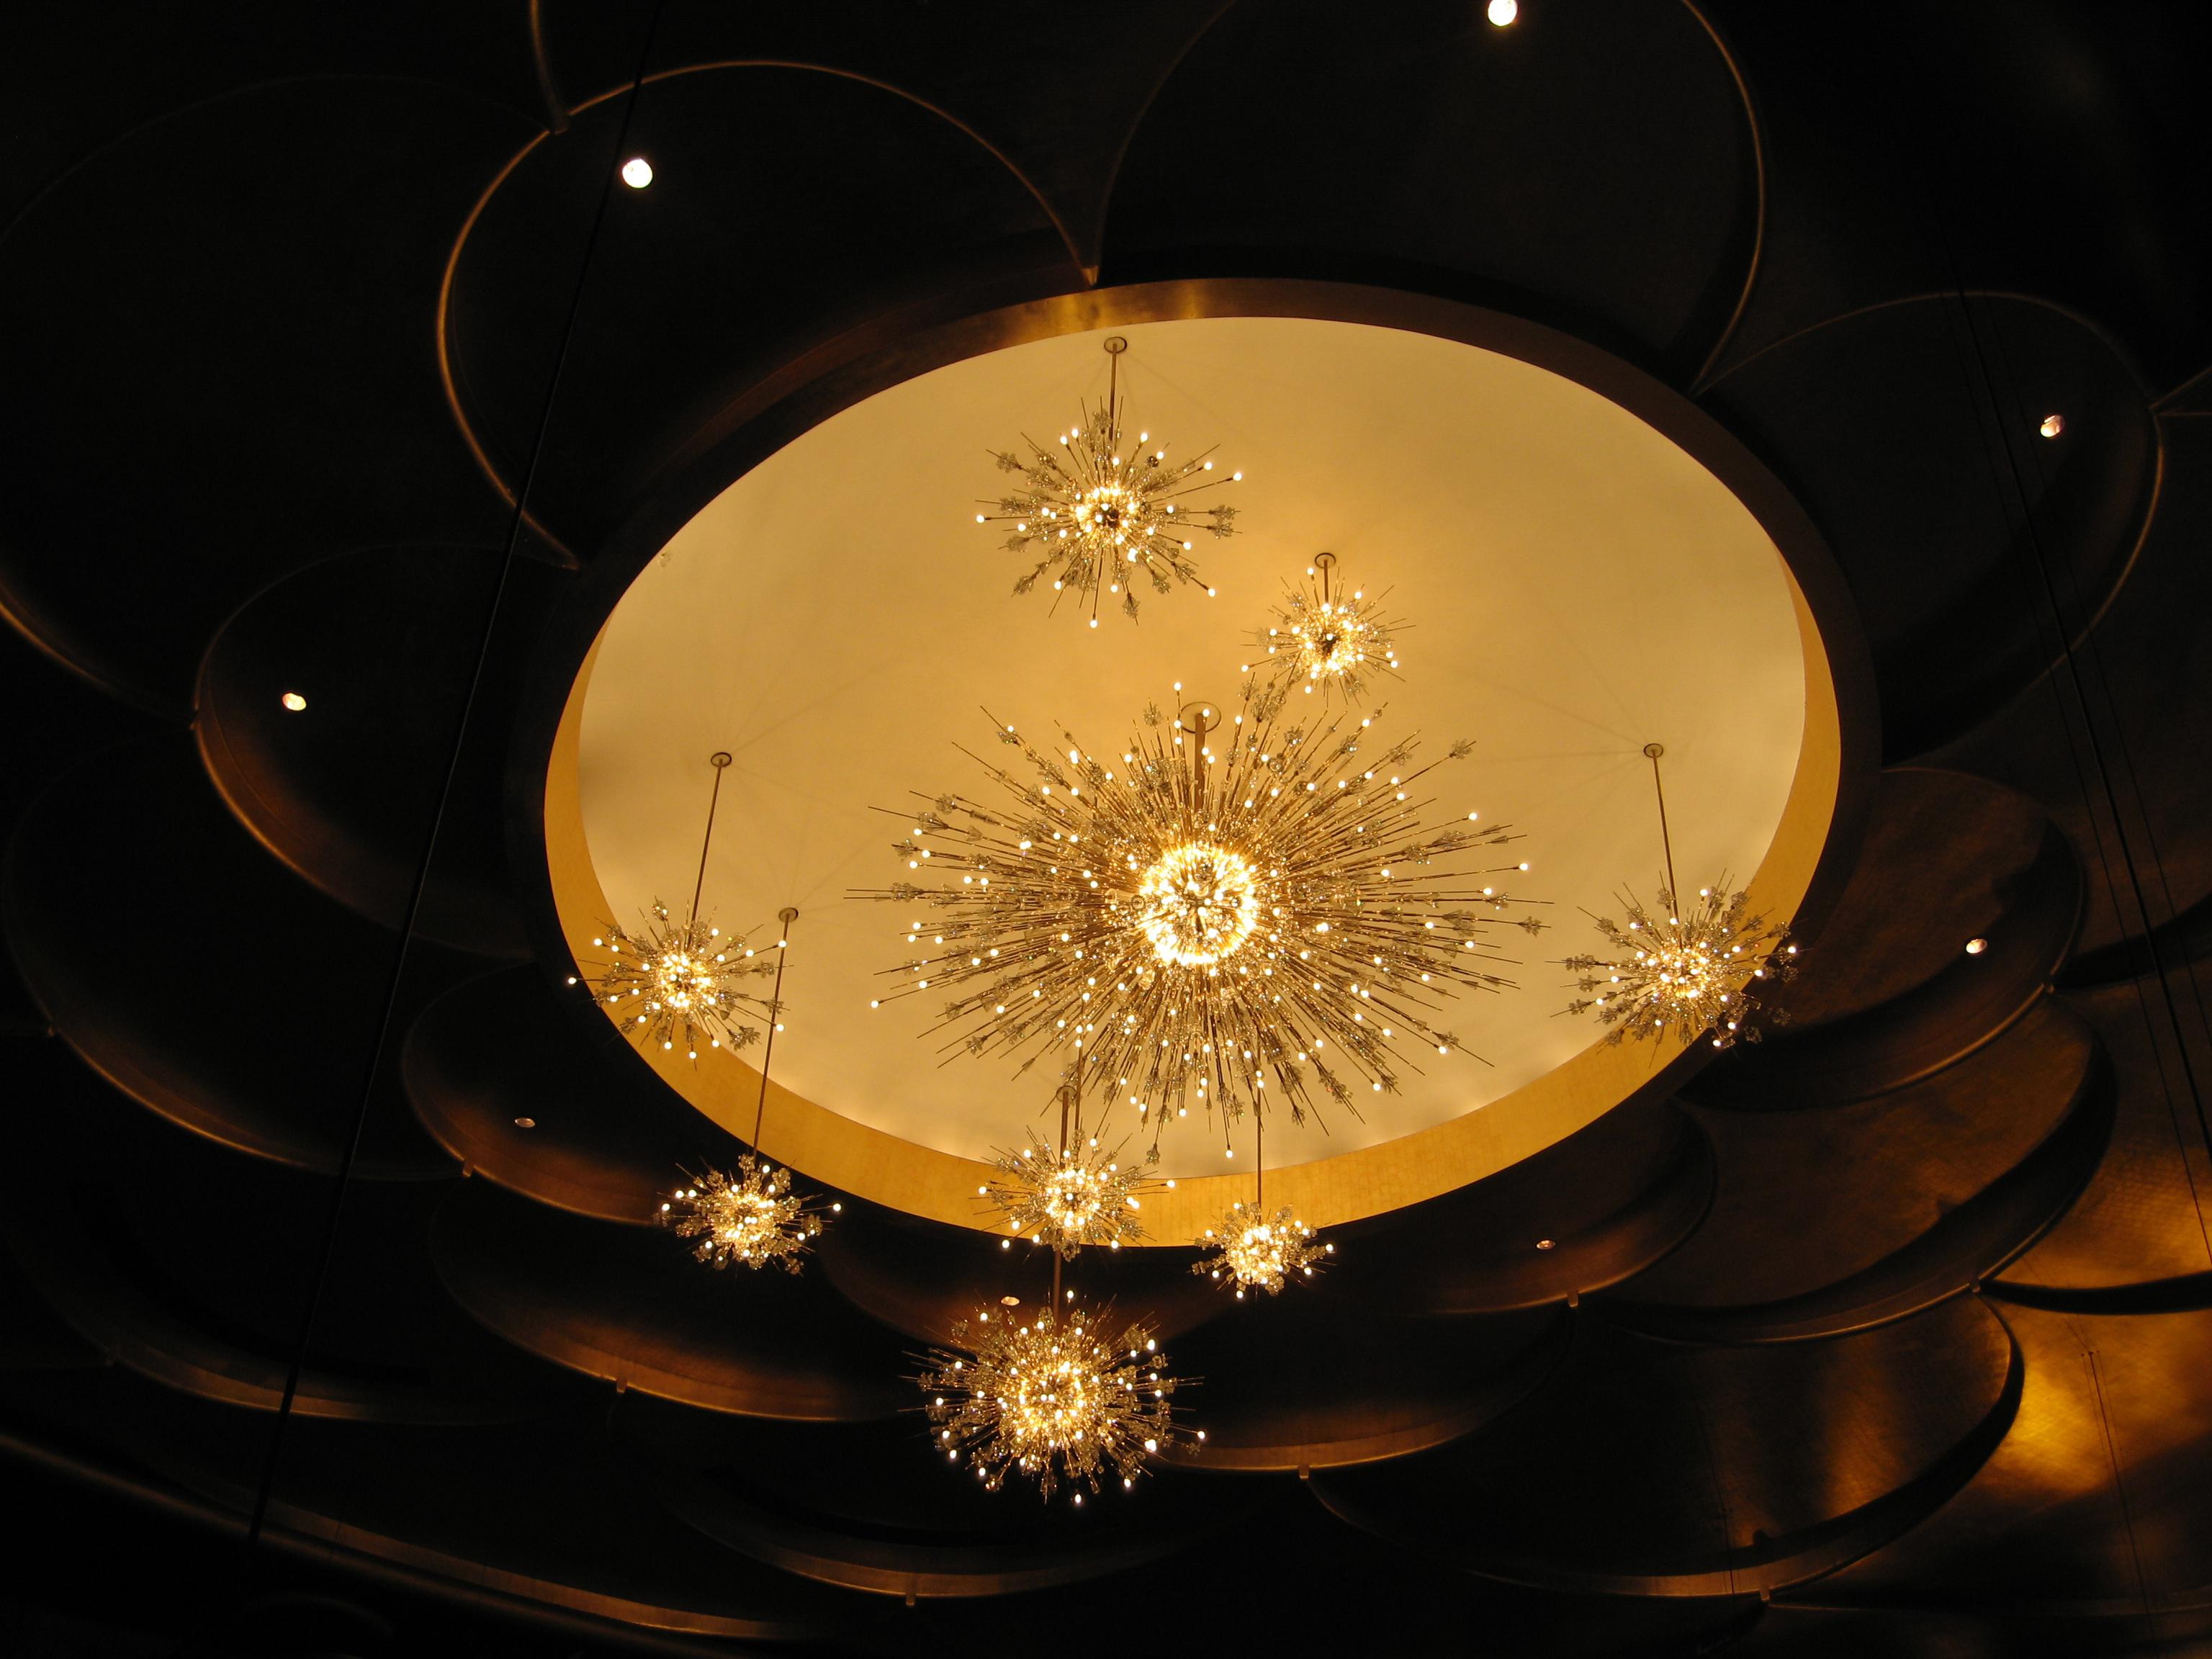 Lobmeyr Metropolitan Opera Crystal Chandelier Auditorium 6660-L-16 In New Condition For Sale In New York, NY